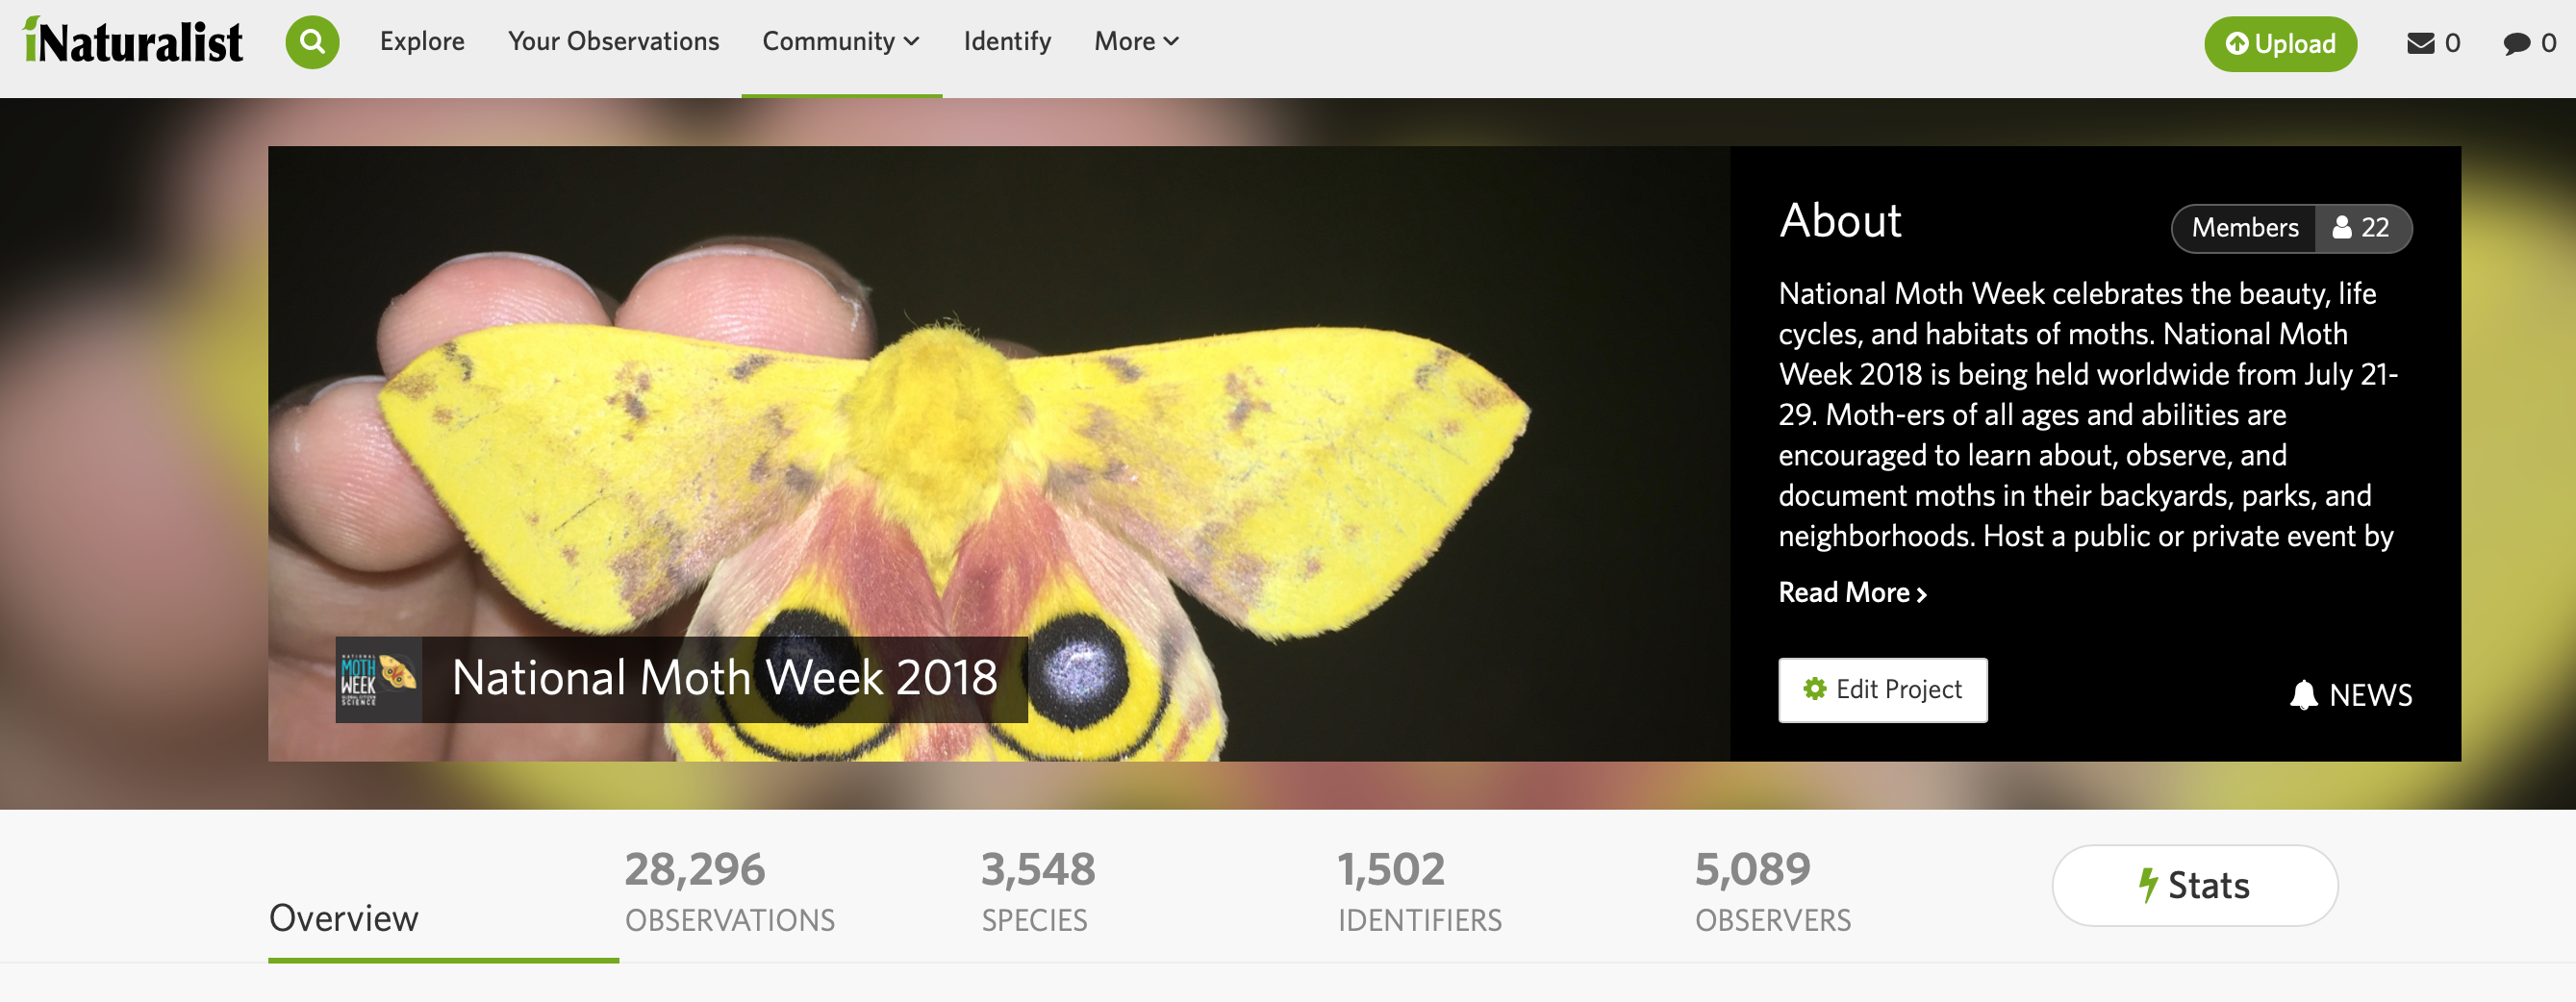 Screenshot from iNaturalist showing National Moth Week 2018 project.